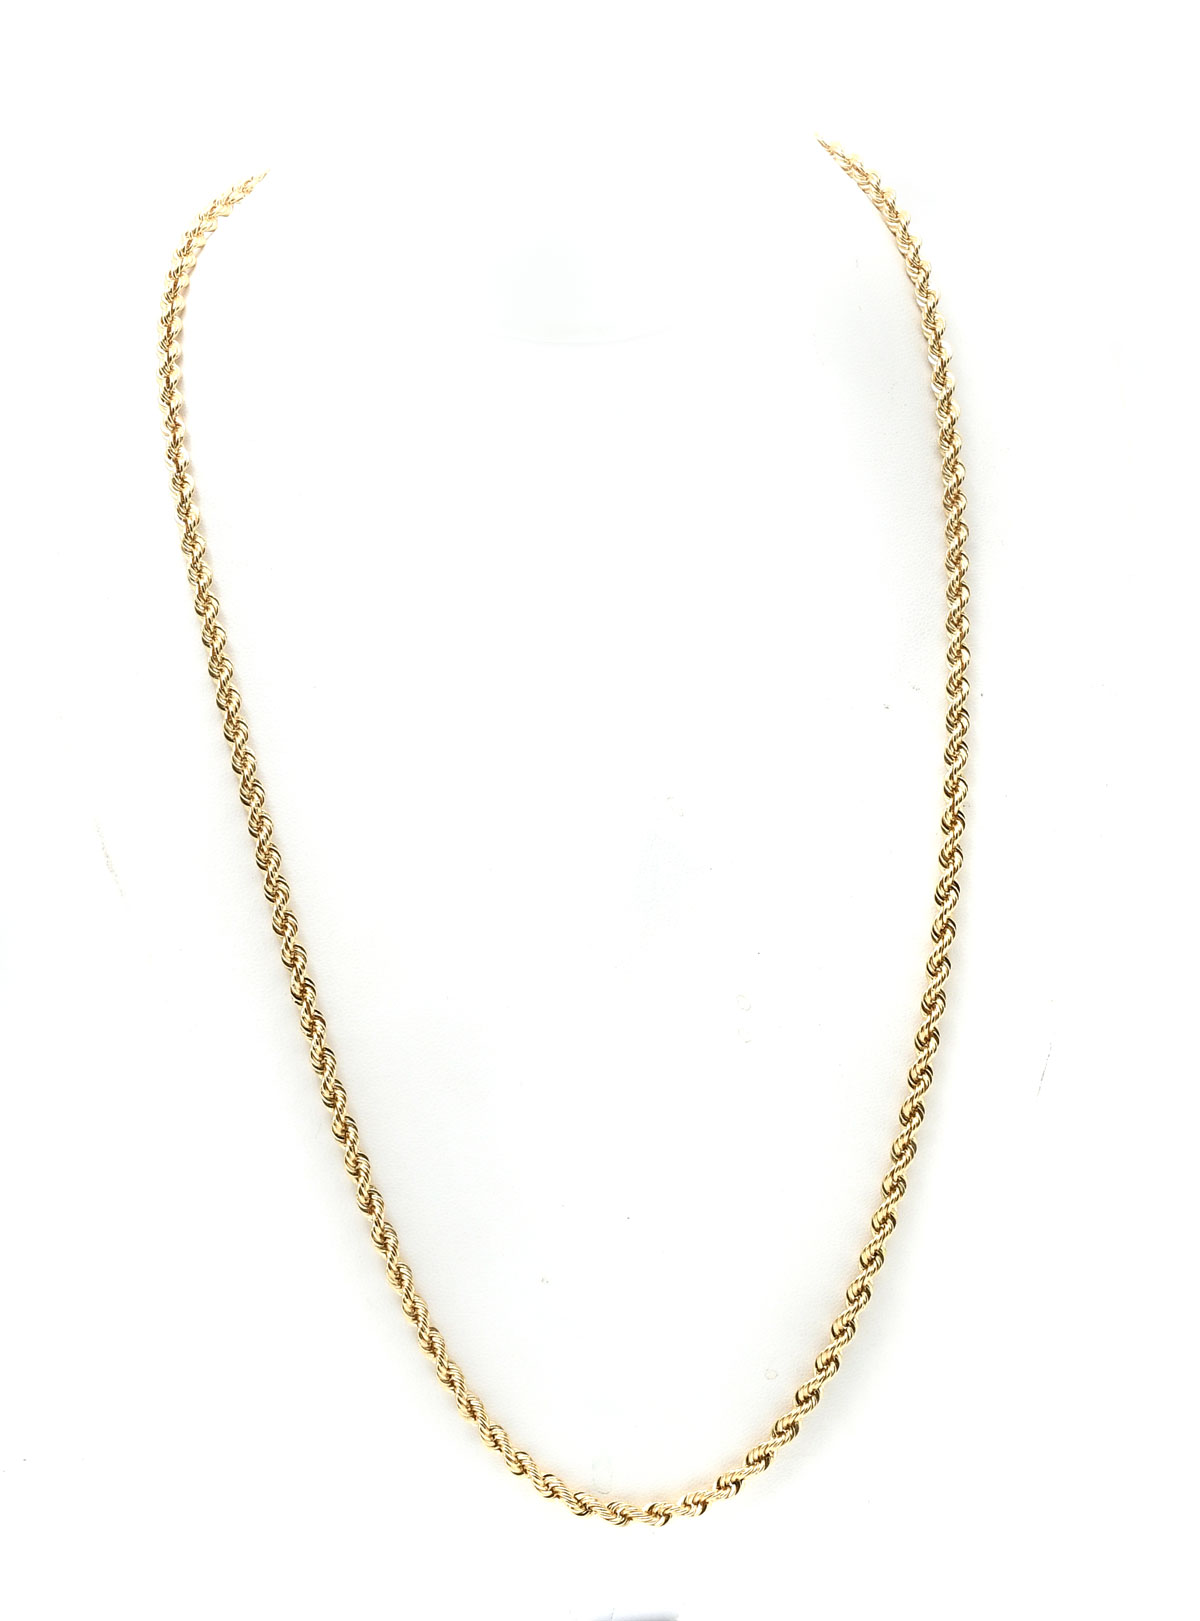 14K 24'' SOLID GOLD ROPE CHAIN: